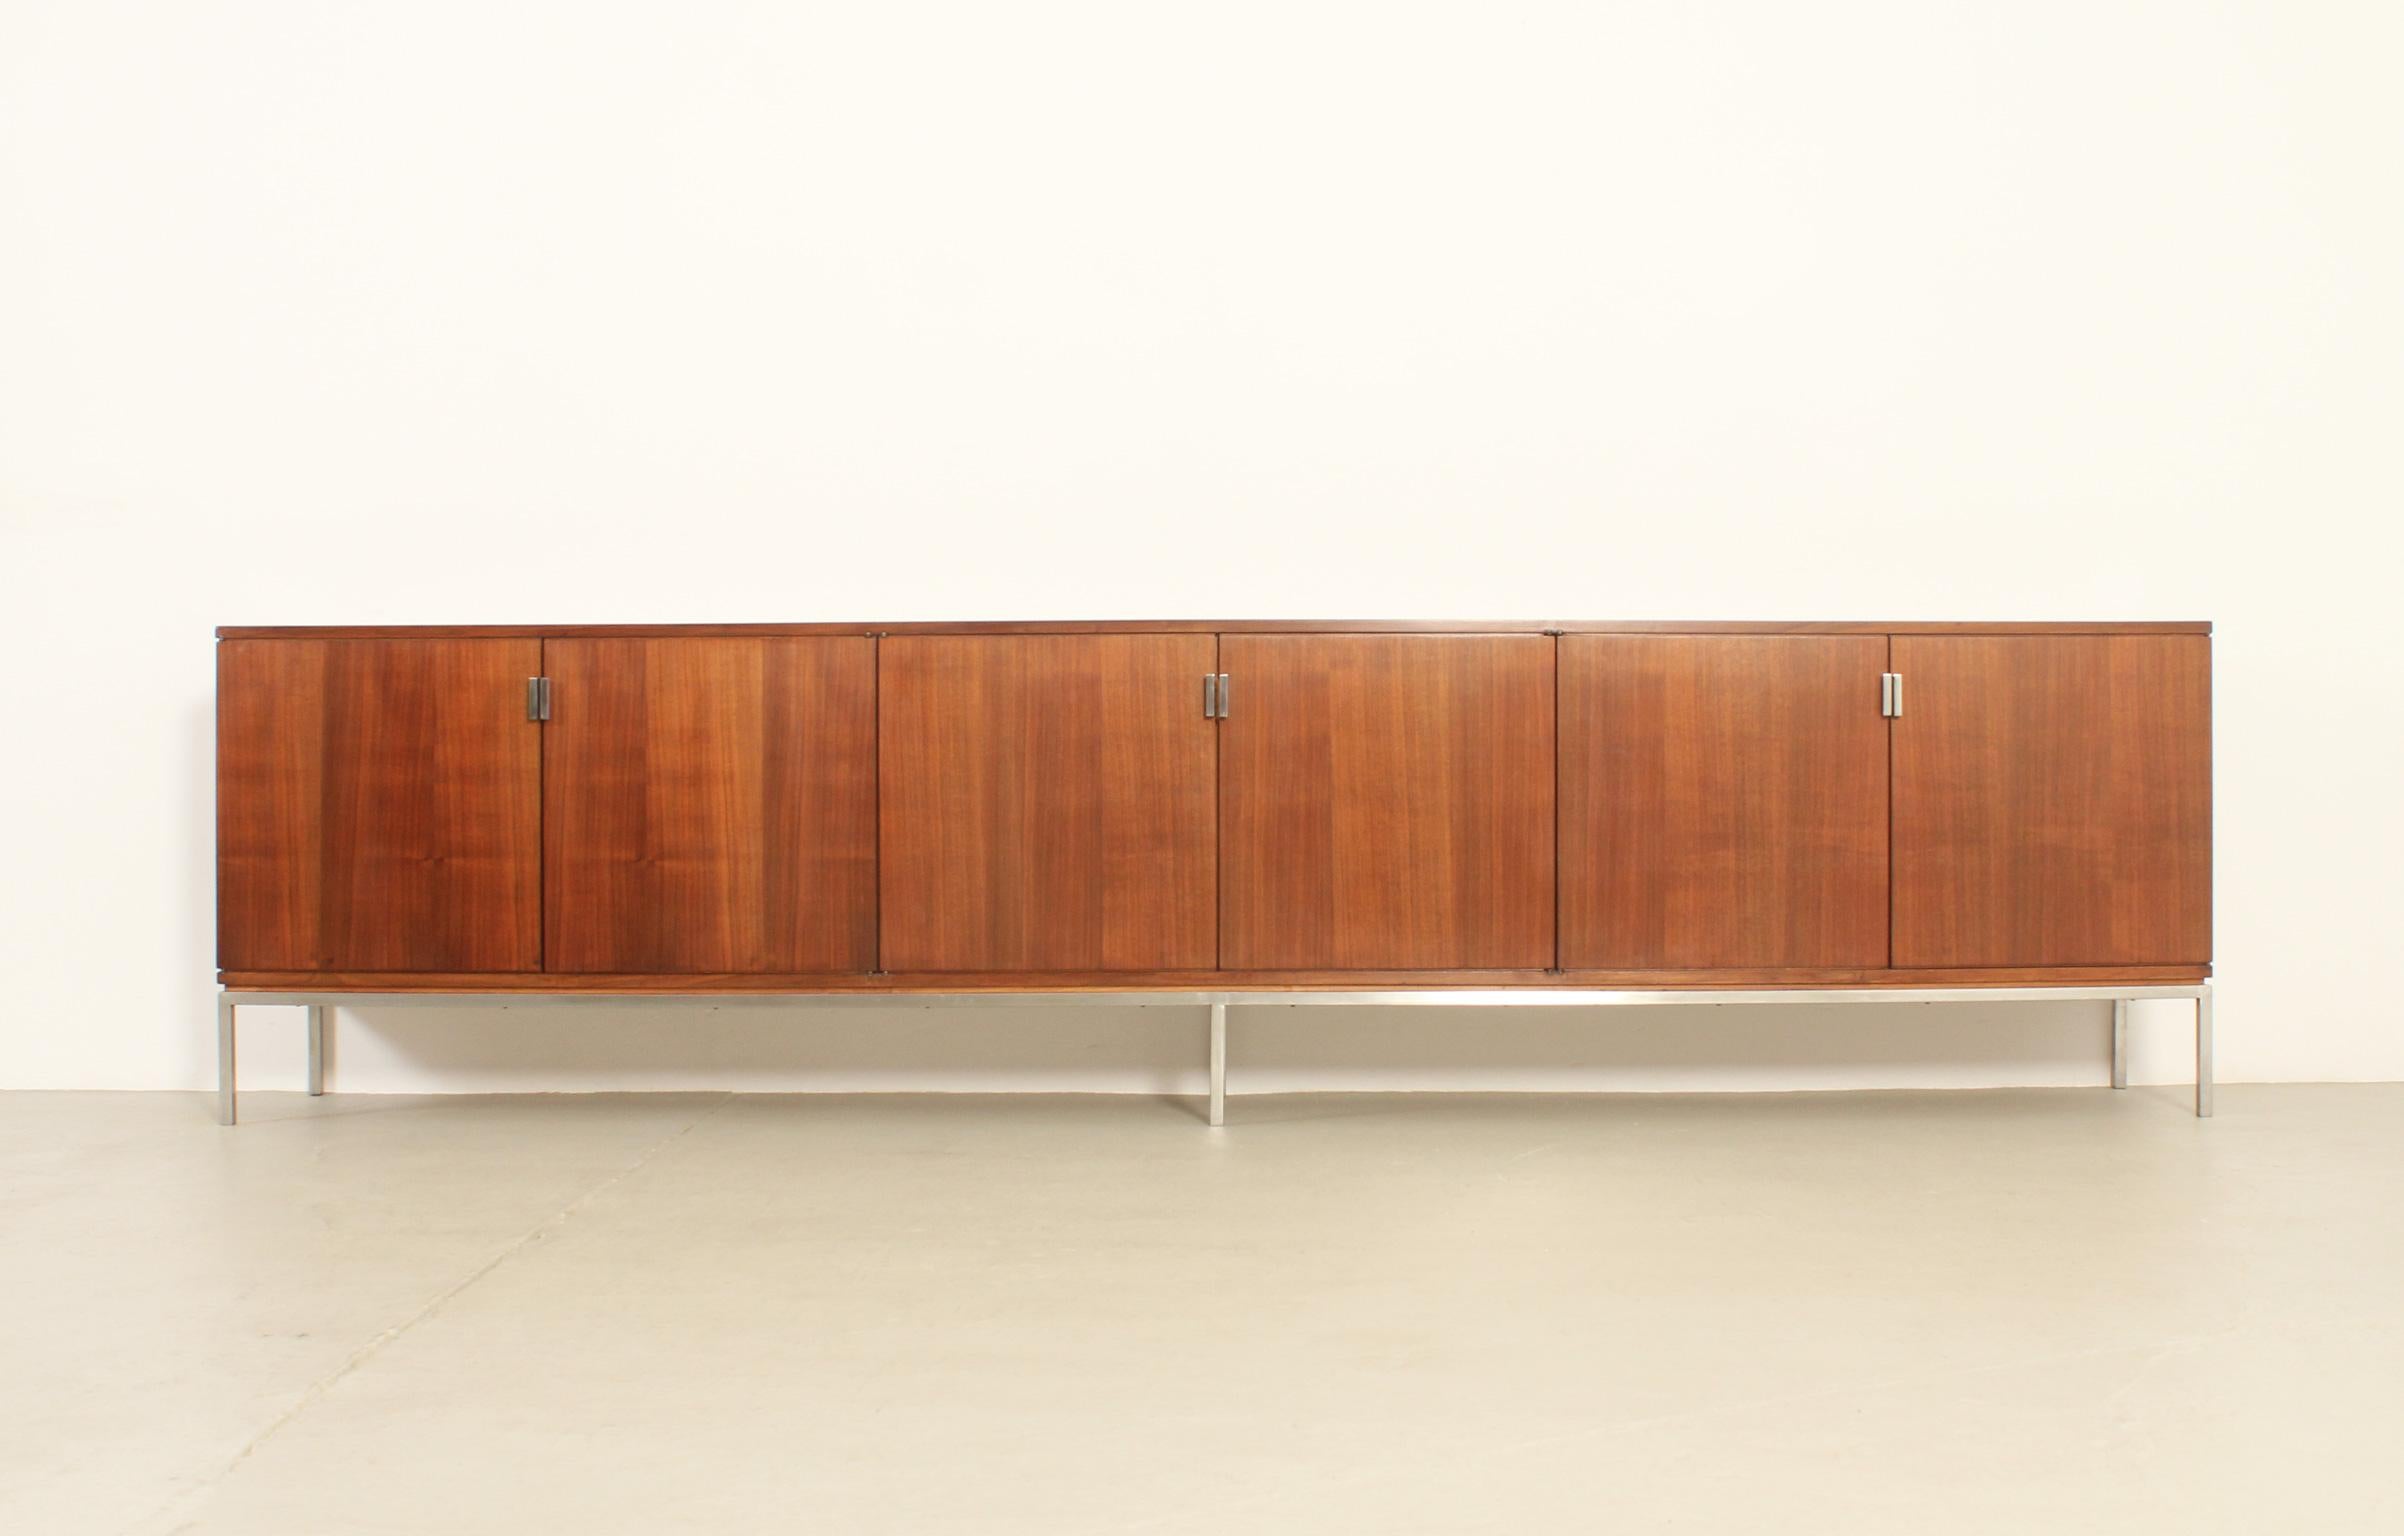 Large sideboard designed in 1960's by Spanish designer Rafael García who was the head of Knoll stores in Spain. Probably custom made for a customer in walnut wood and polished steel. Six door with five open spaces with shelves and five drawers in